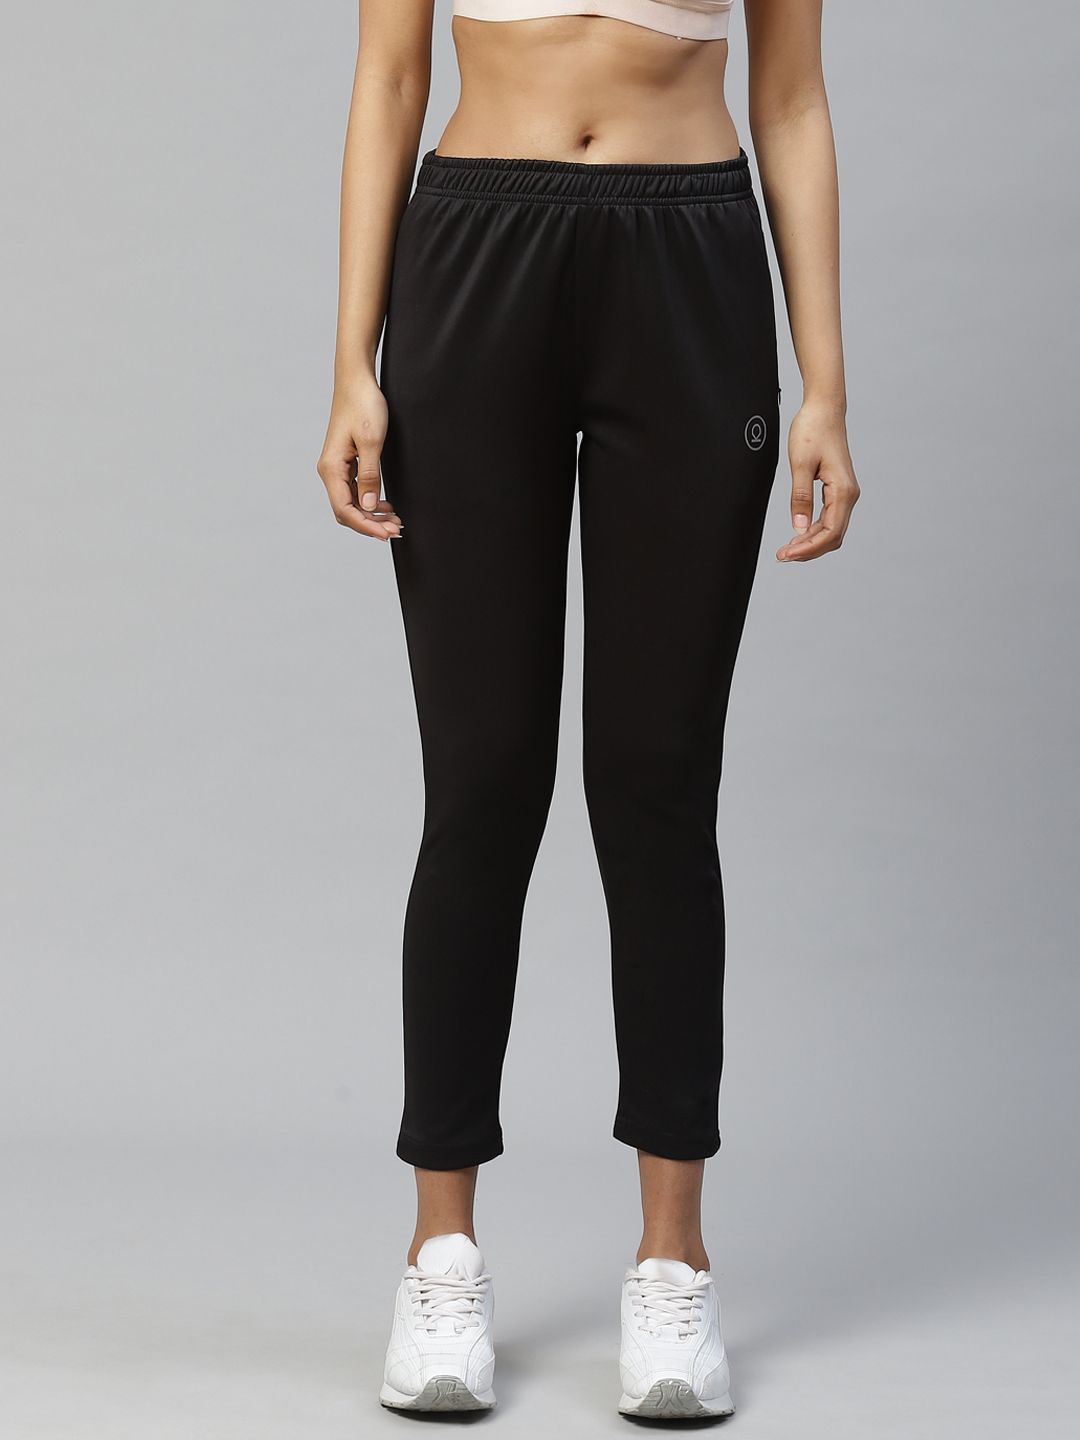 Chkokko Women Black Solid Slim Fit Workout Track Pants Price in India